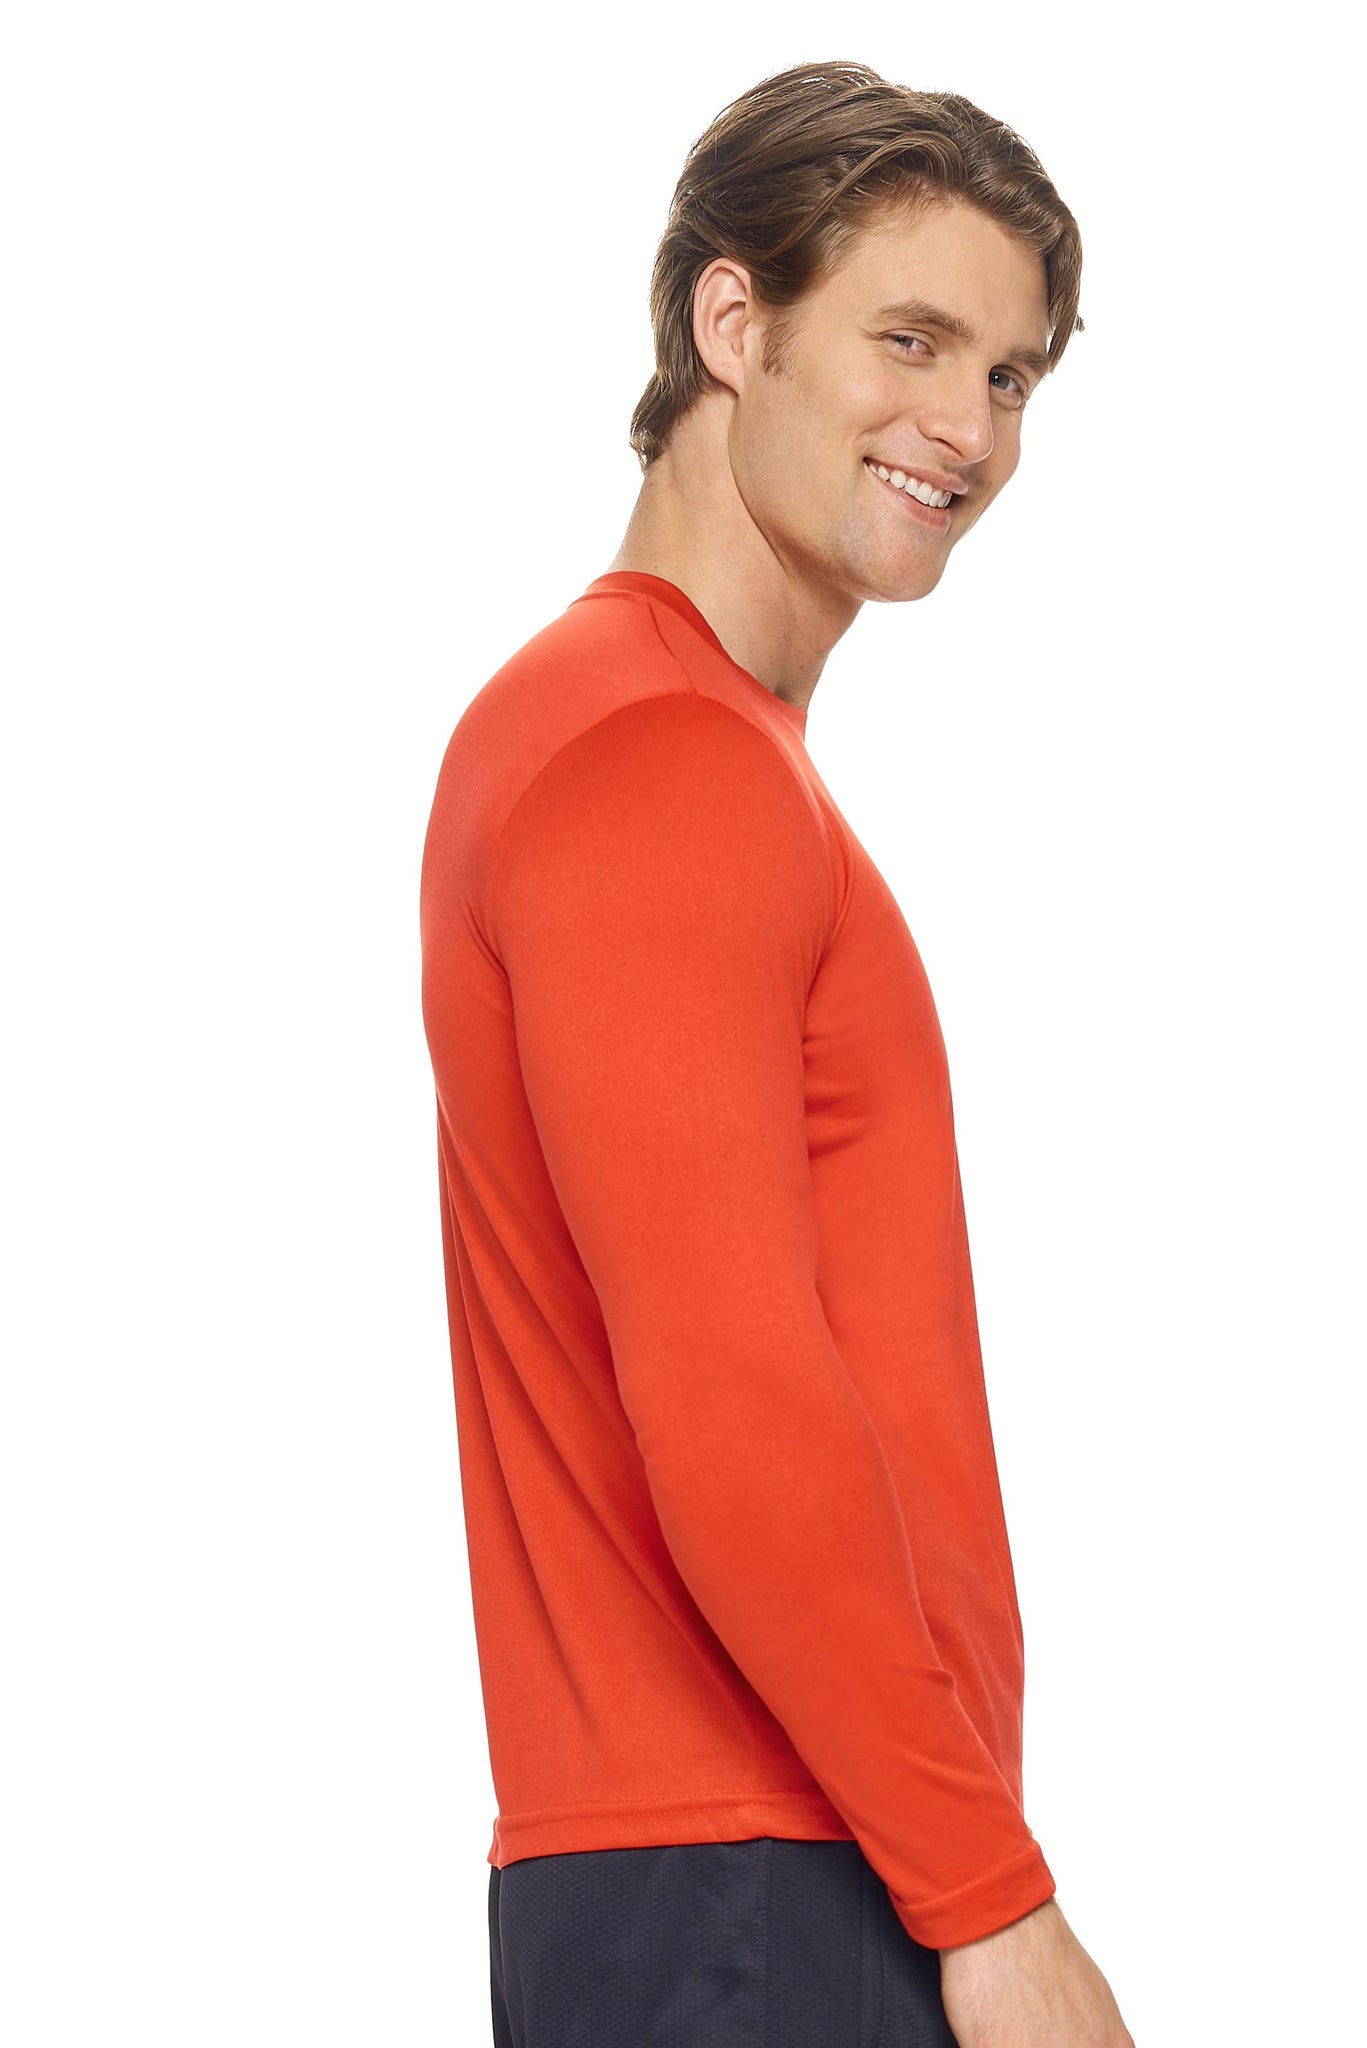 AT901🇺🇸 Natural Feel Jersey Long Sleeve Crewneck - Expert Brand#red